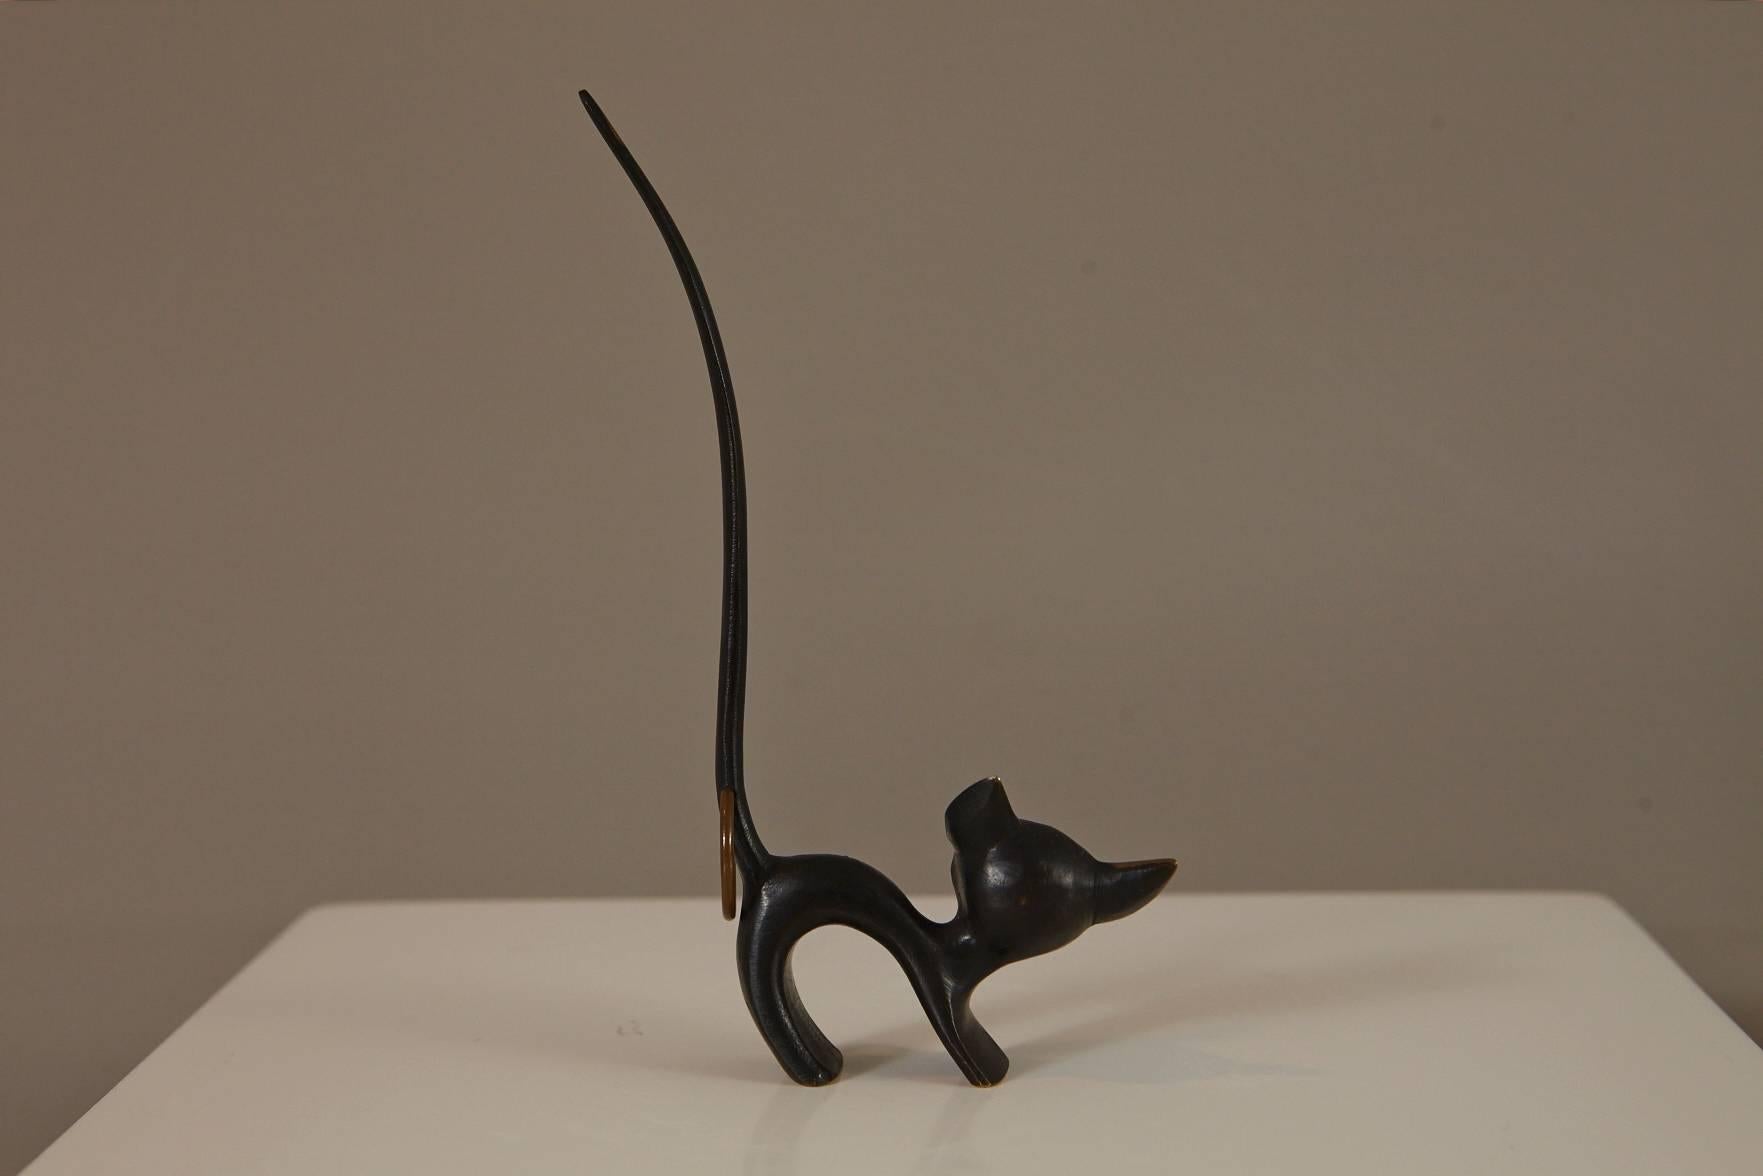 A very charming little brass cat figurine. Another one of Walter Bosses' humorous animal designs in brass. Manufactured by Hertha Baller in Austria in the 1950s. The figurine is in excellent condition. 

The long tail of the cat can be used as a